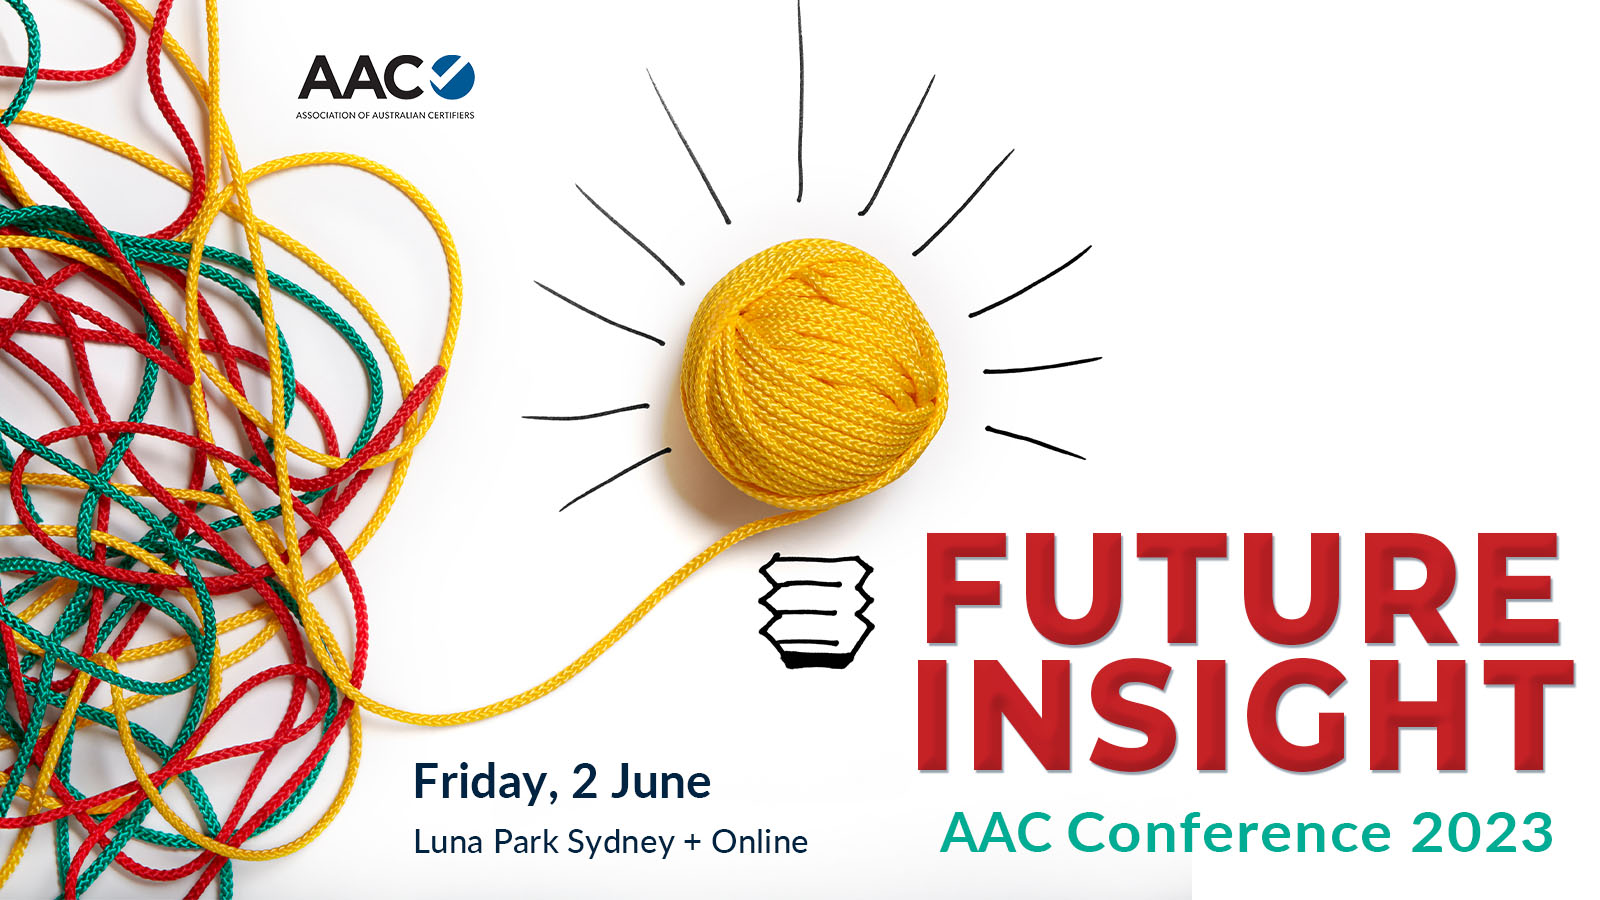 2023 AAC Annual Conference Future Insight